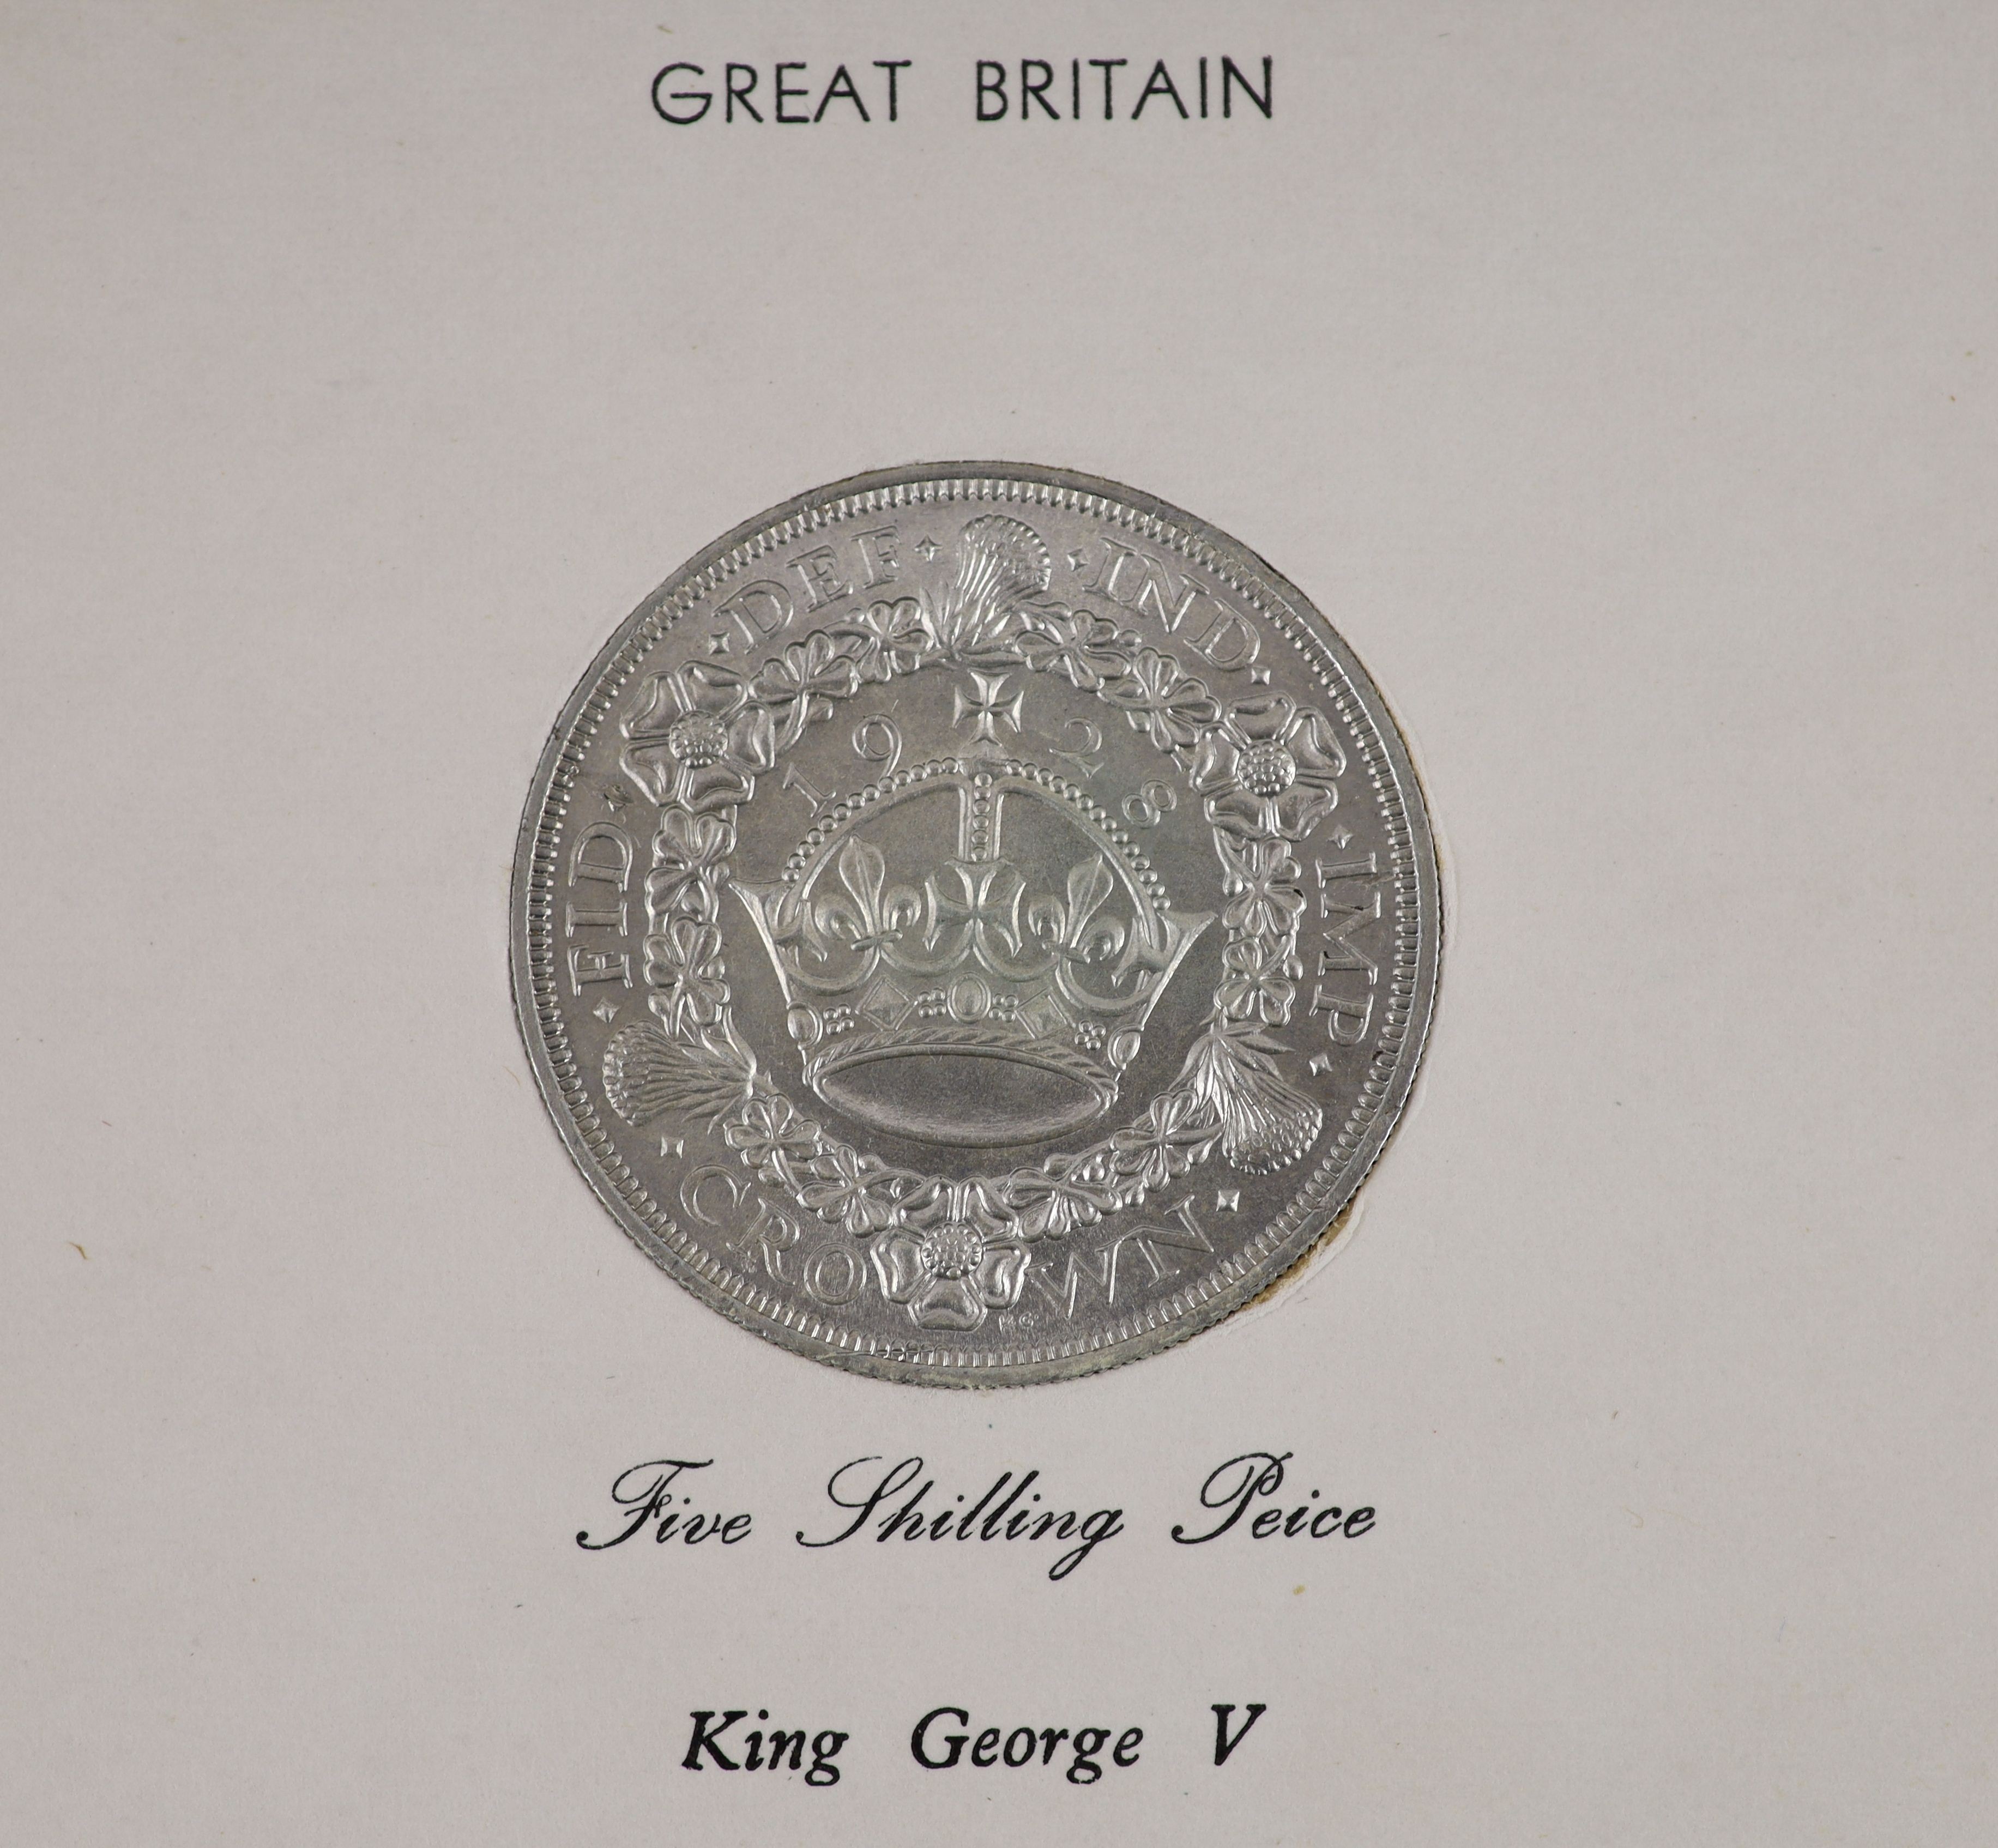 A George V specimen set of nine coins, 1928, fourth coinage, comprising Crown, 1928 (S 4036), cleaned, obv. edge nick at 12, otherwise EF, halfcrown to threepence, cleaned otherwise near EF, penny to farthing, toned and